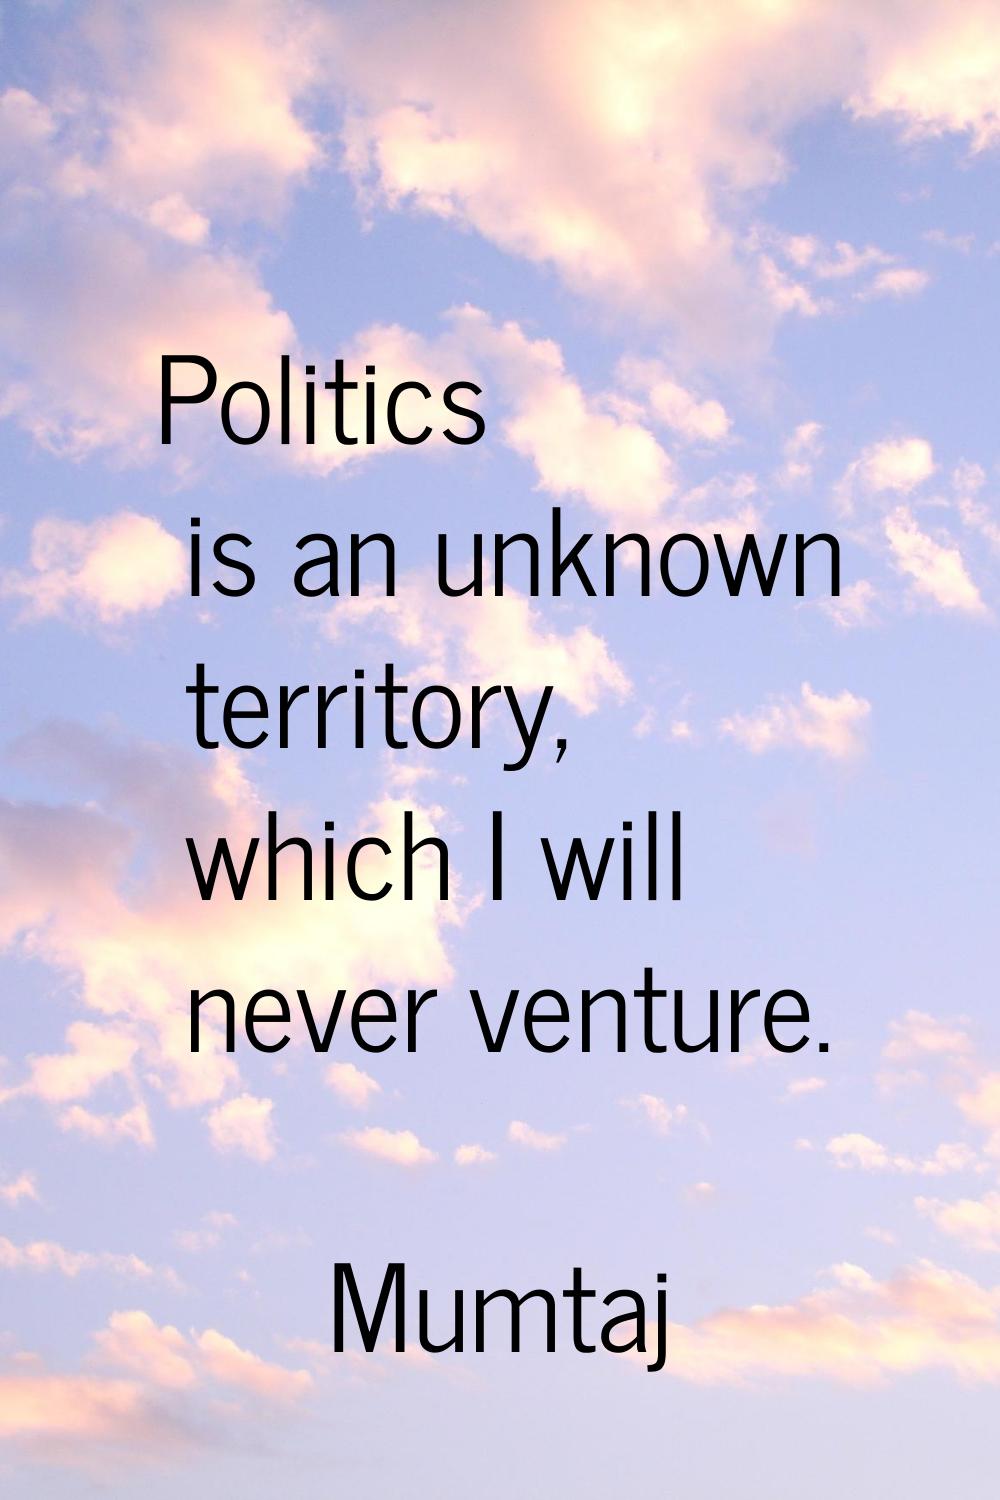 Politics is an unknown territory, which I will never venture.